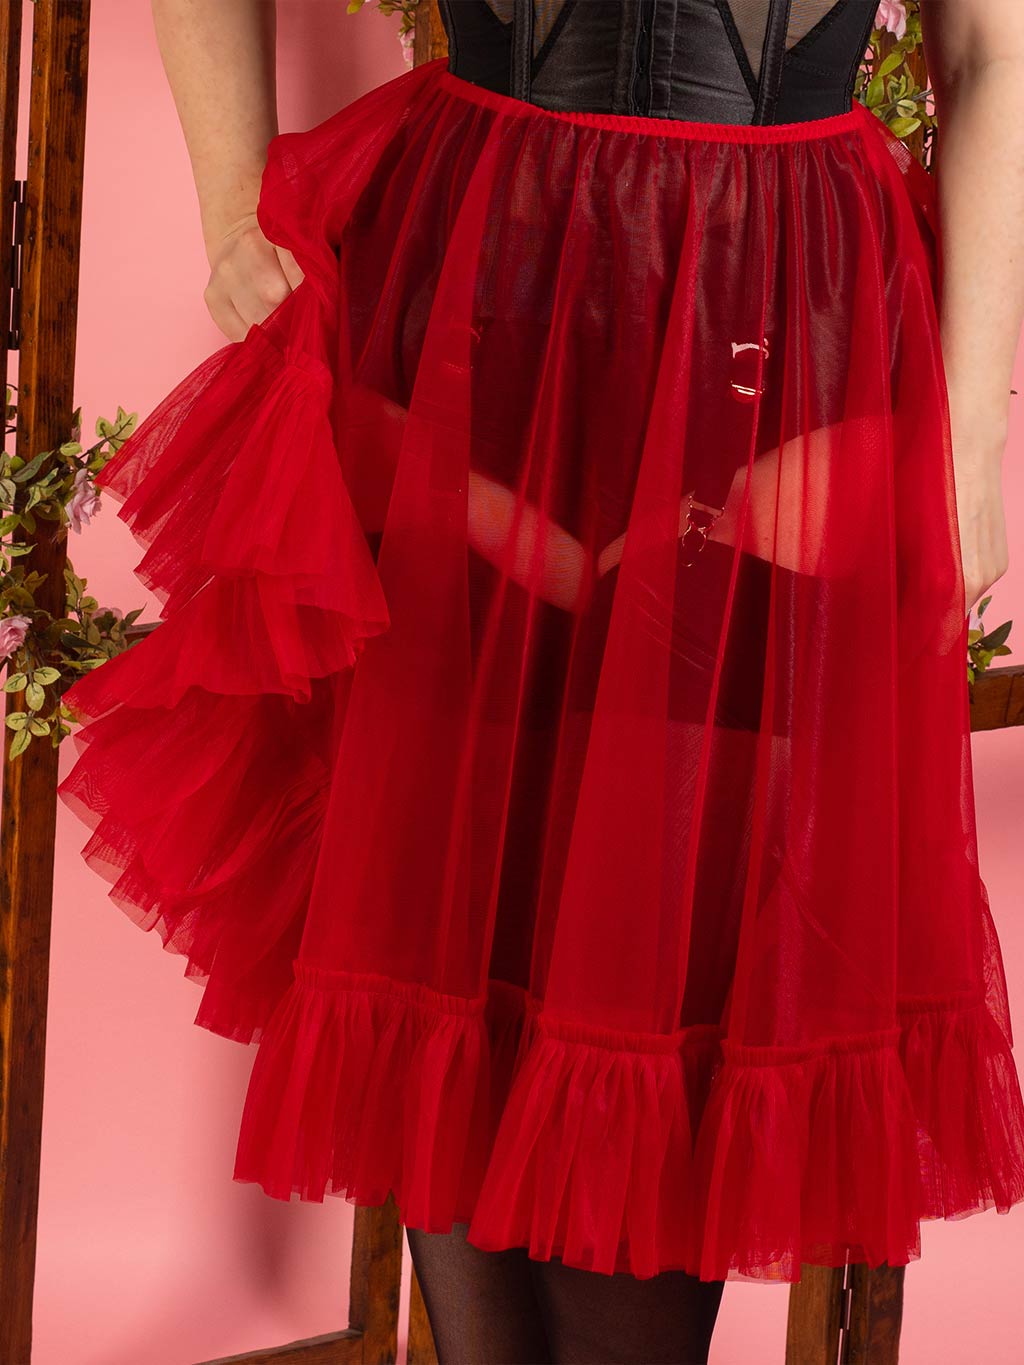 sheer red frilly petticoat